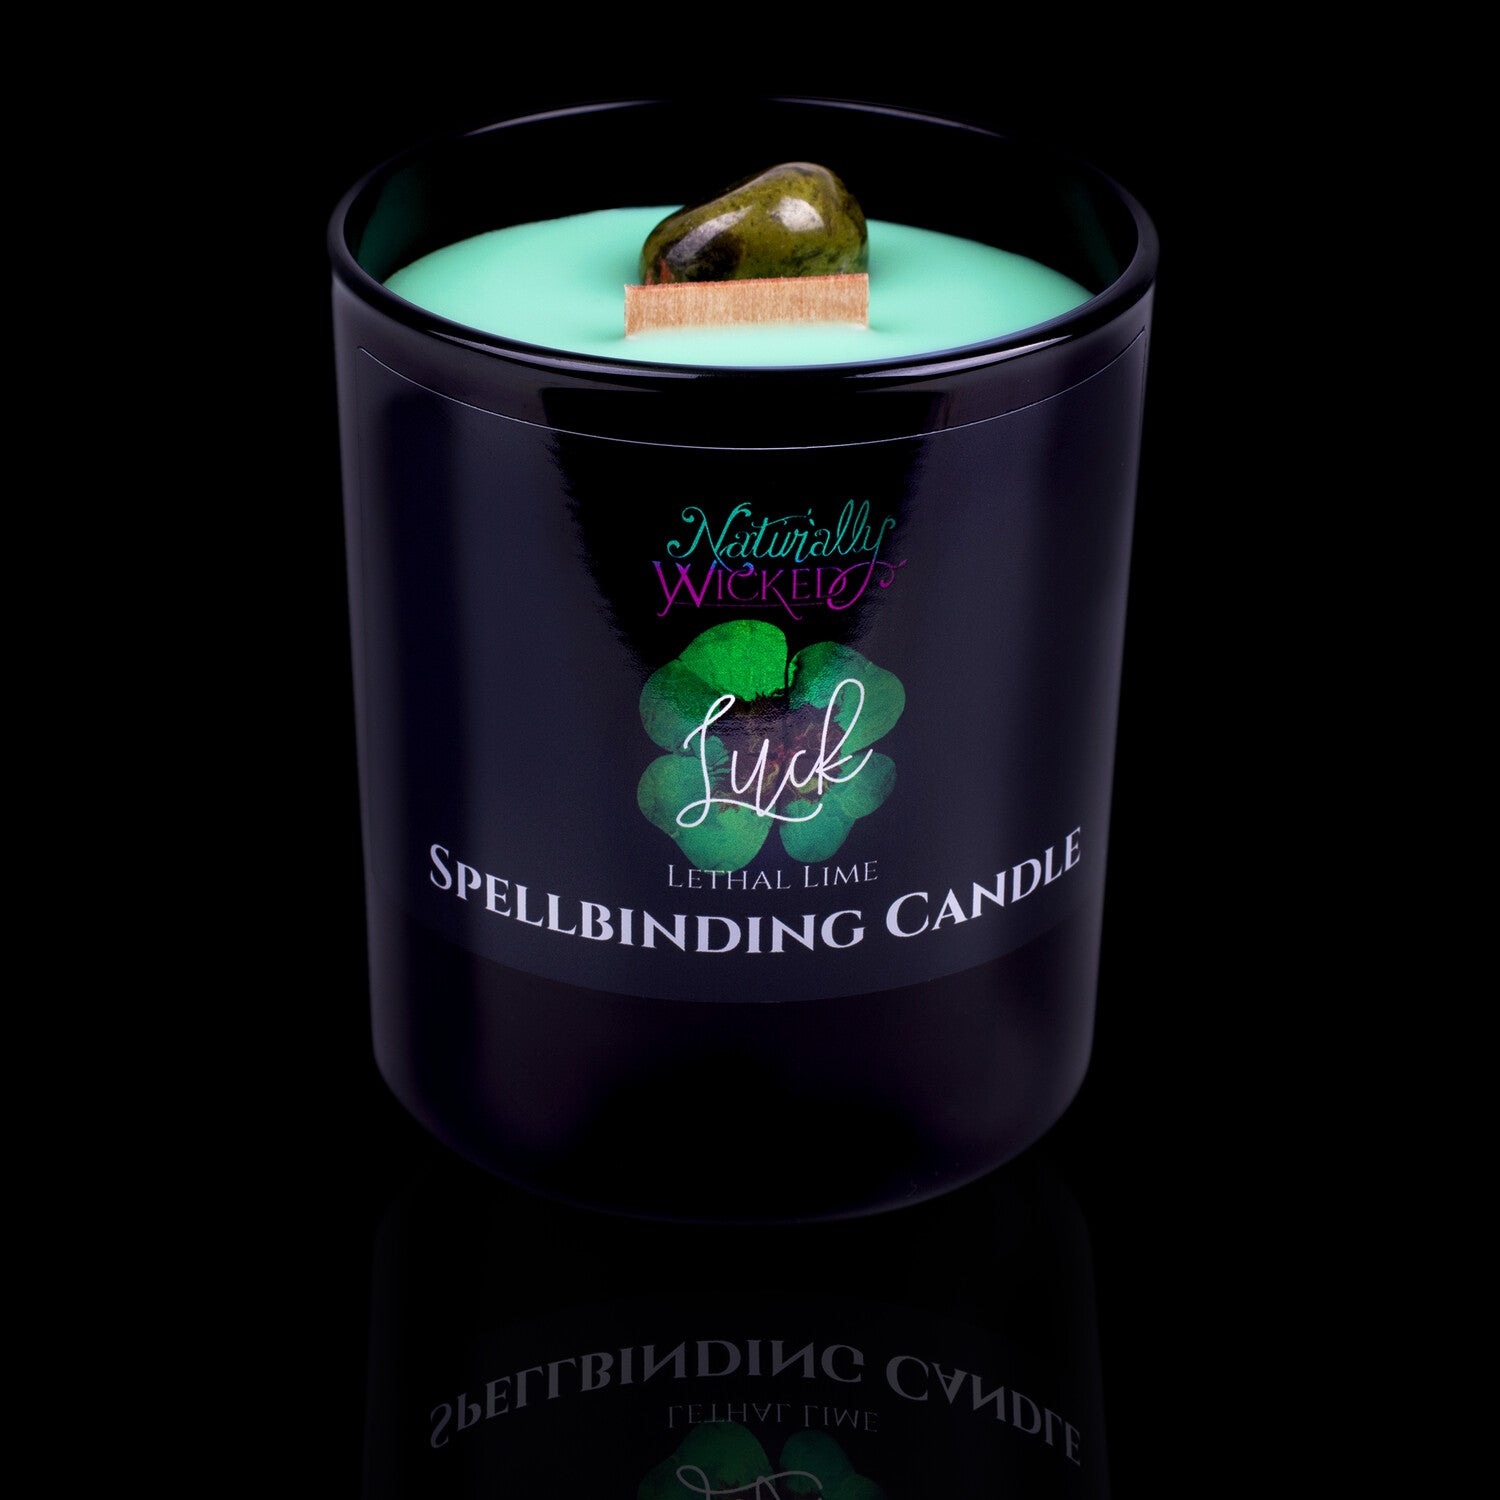 Give The Gift Of Luck With The Naturally Wicked Spellbinding Luck Crystal Candle Entombed In Green Plant-Based Wax With Crackling Wood Wick & Spotted Epidote Crystal